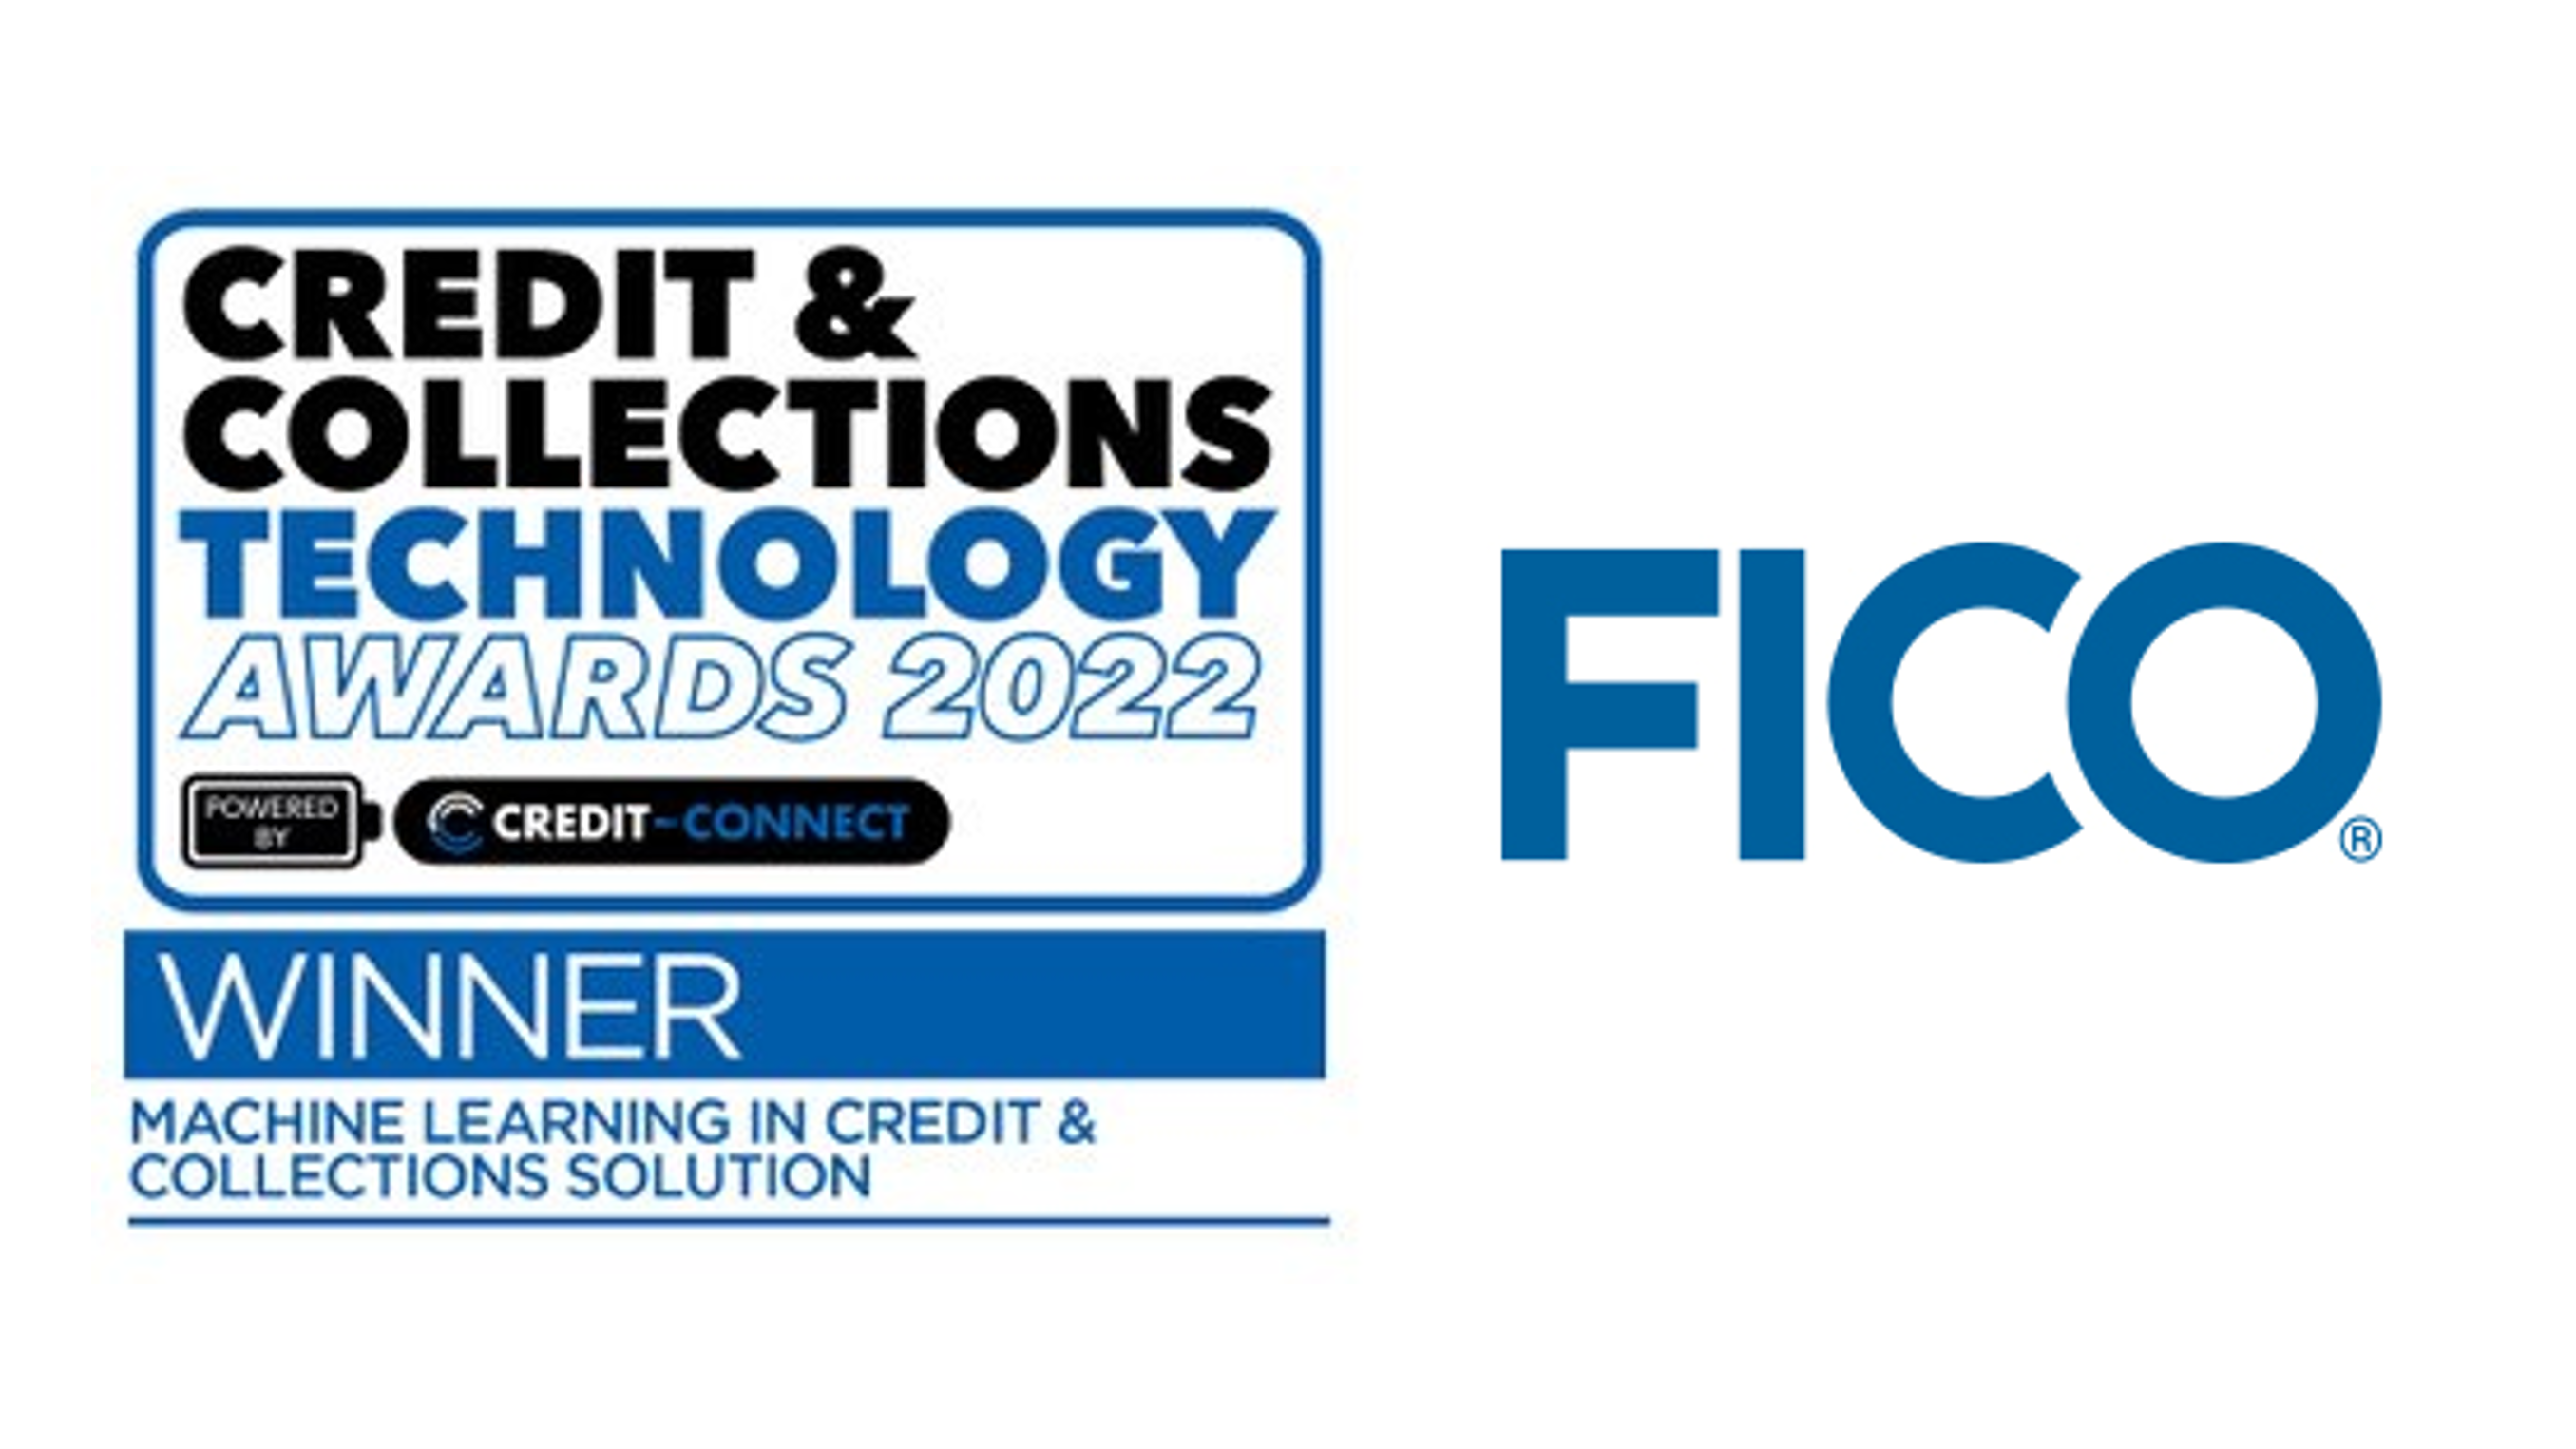 FICO Award for Machine Learning